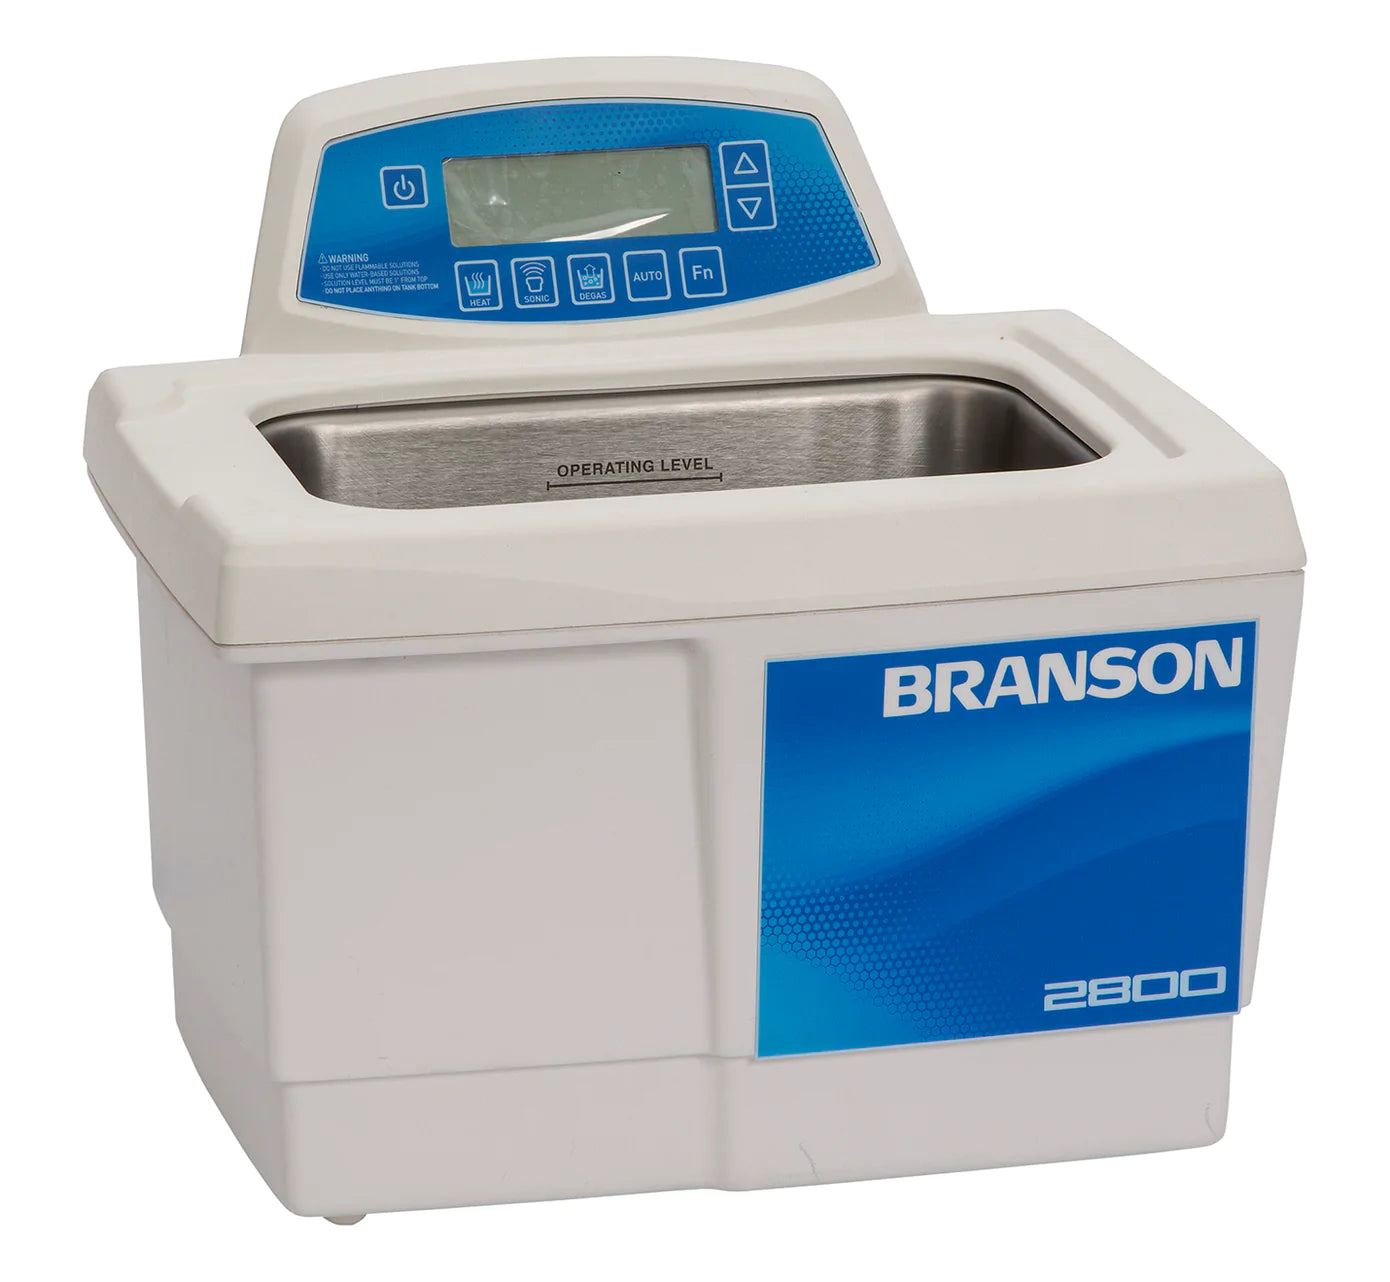 stainless-steel-solid-tray-for-branson-2500-2800-ultrasonic-cleaners-100-410-172